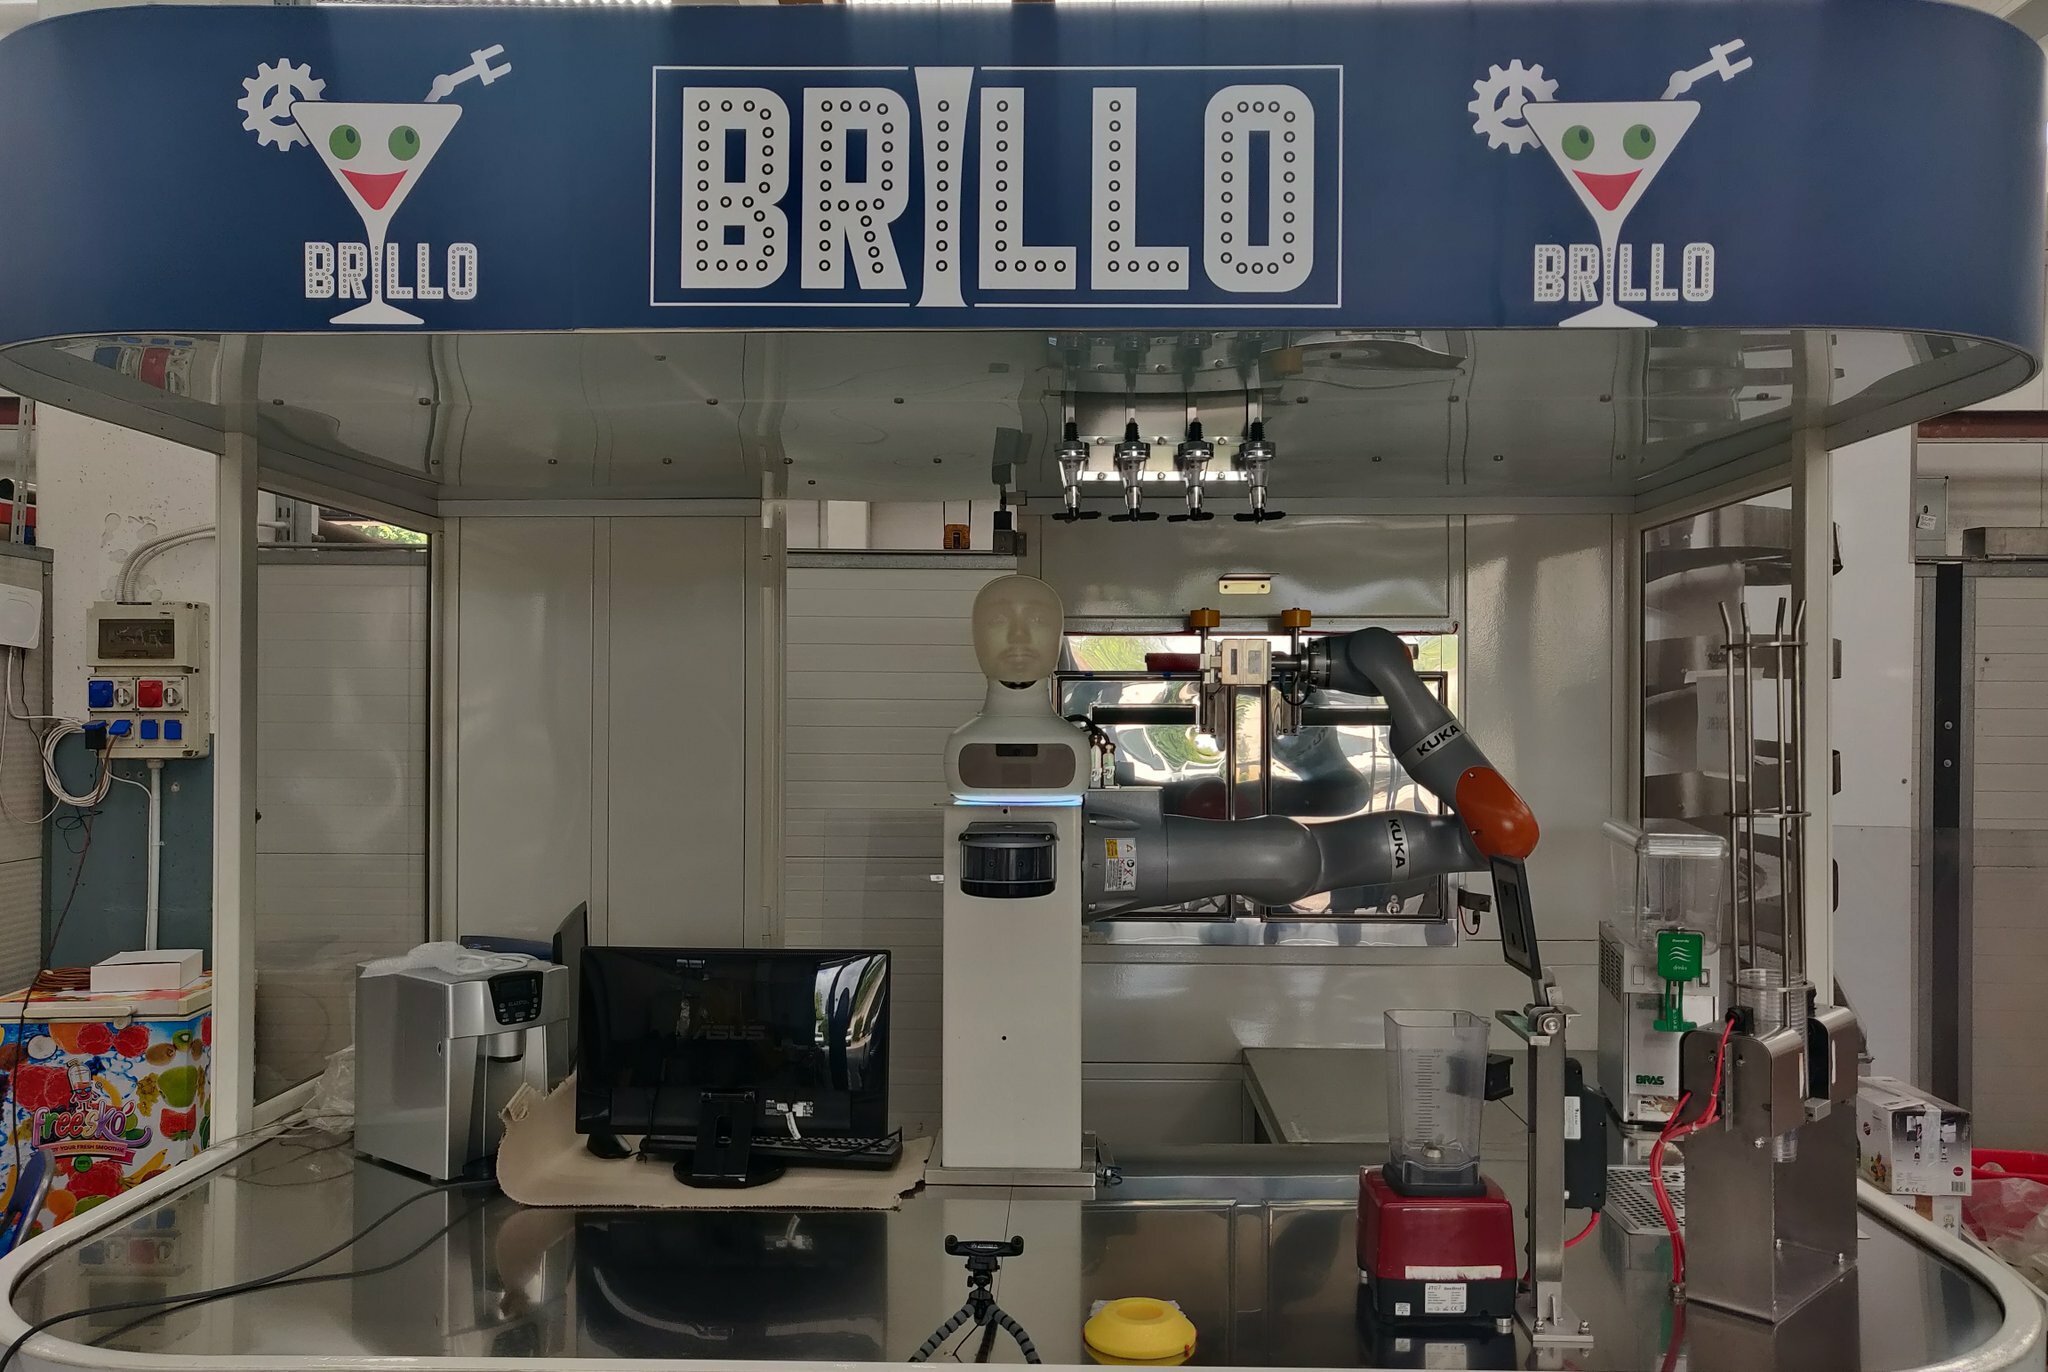 Meet BRILLO: The robot bartender for when you’re tired of human interaction